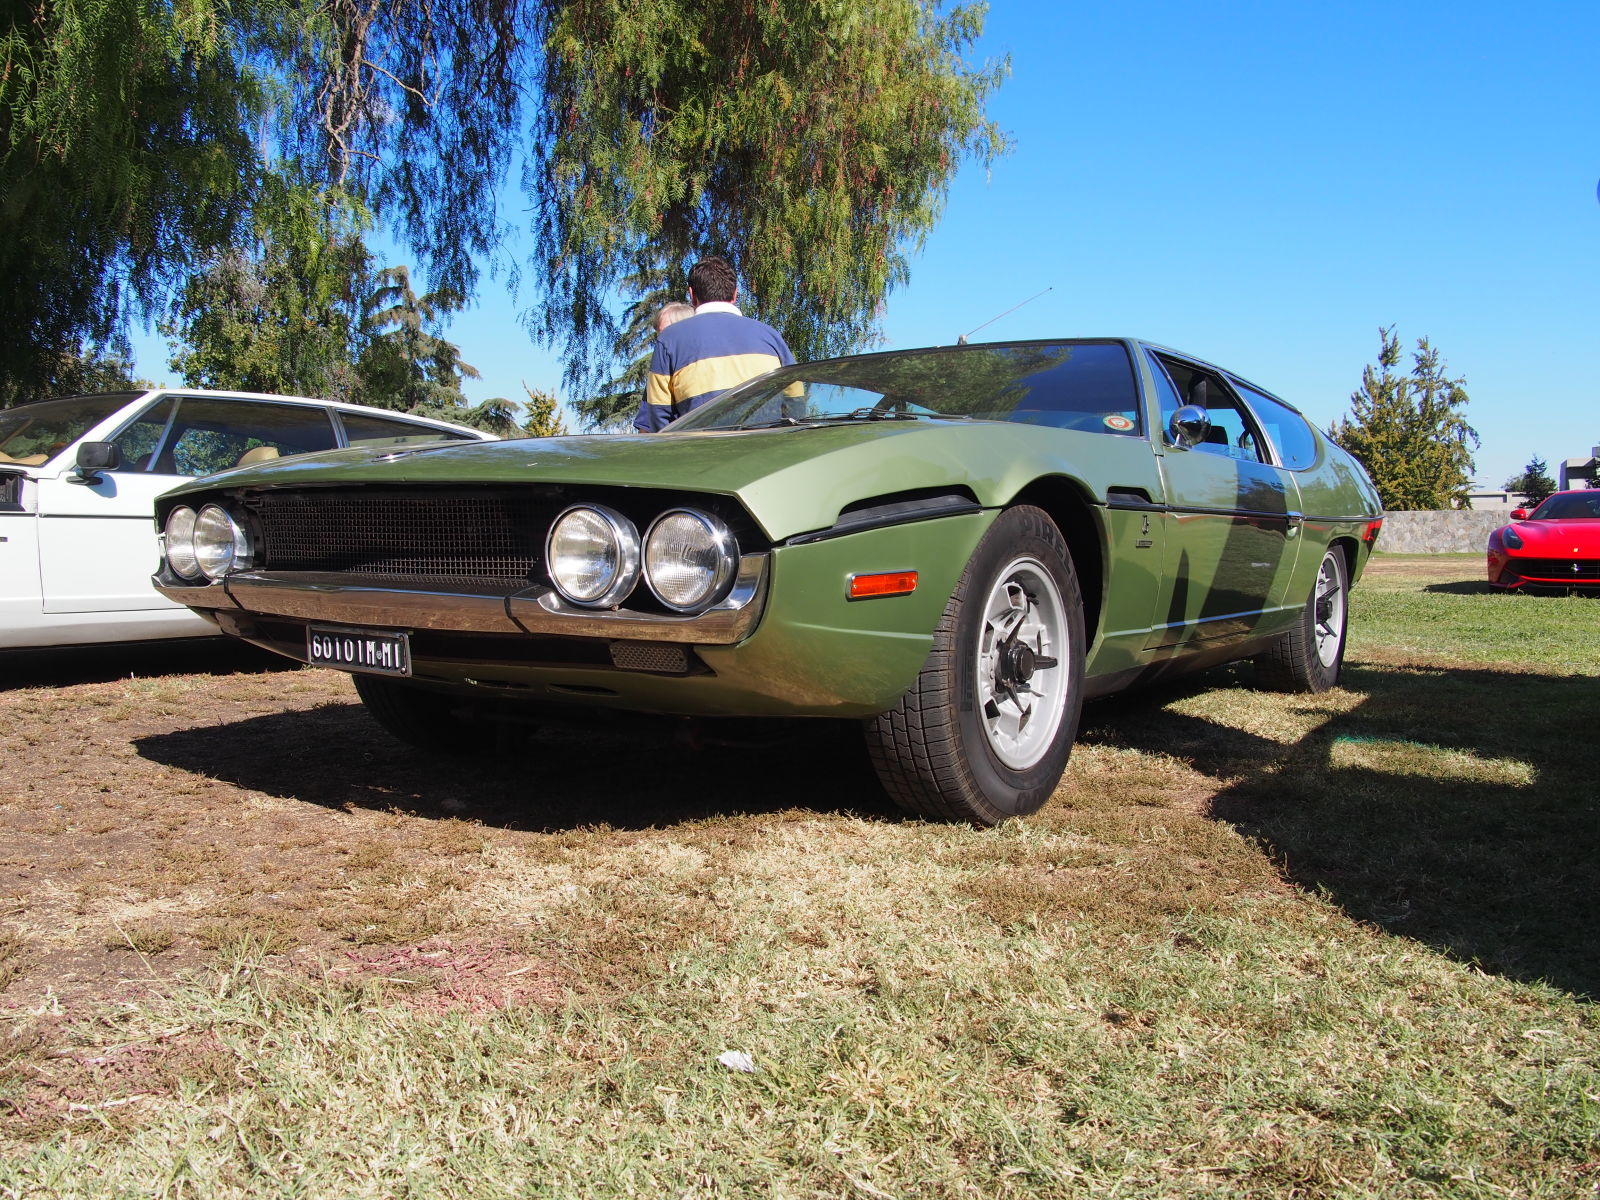 I think this Espada looks pretty awesome in green.